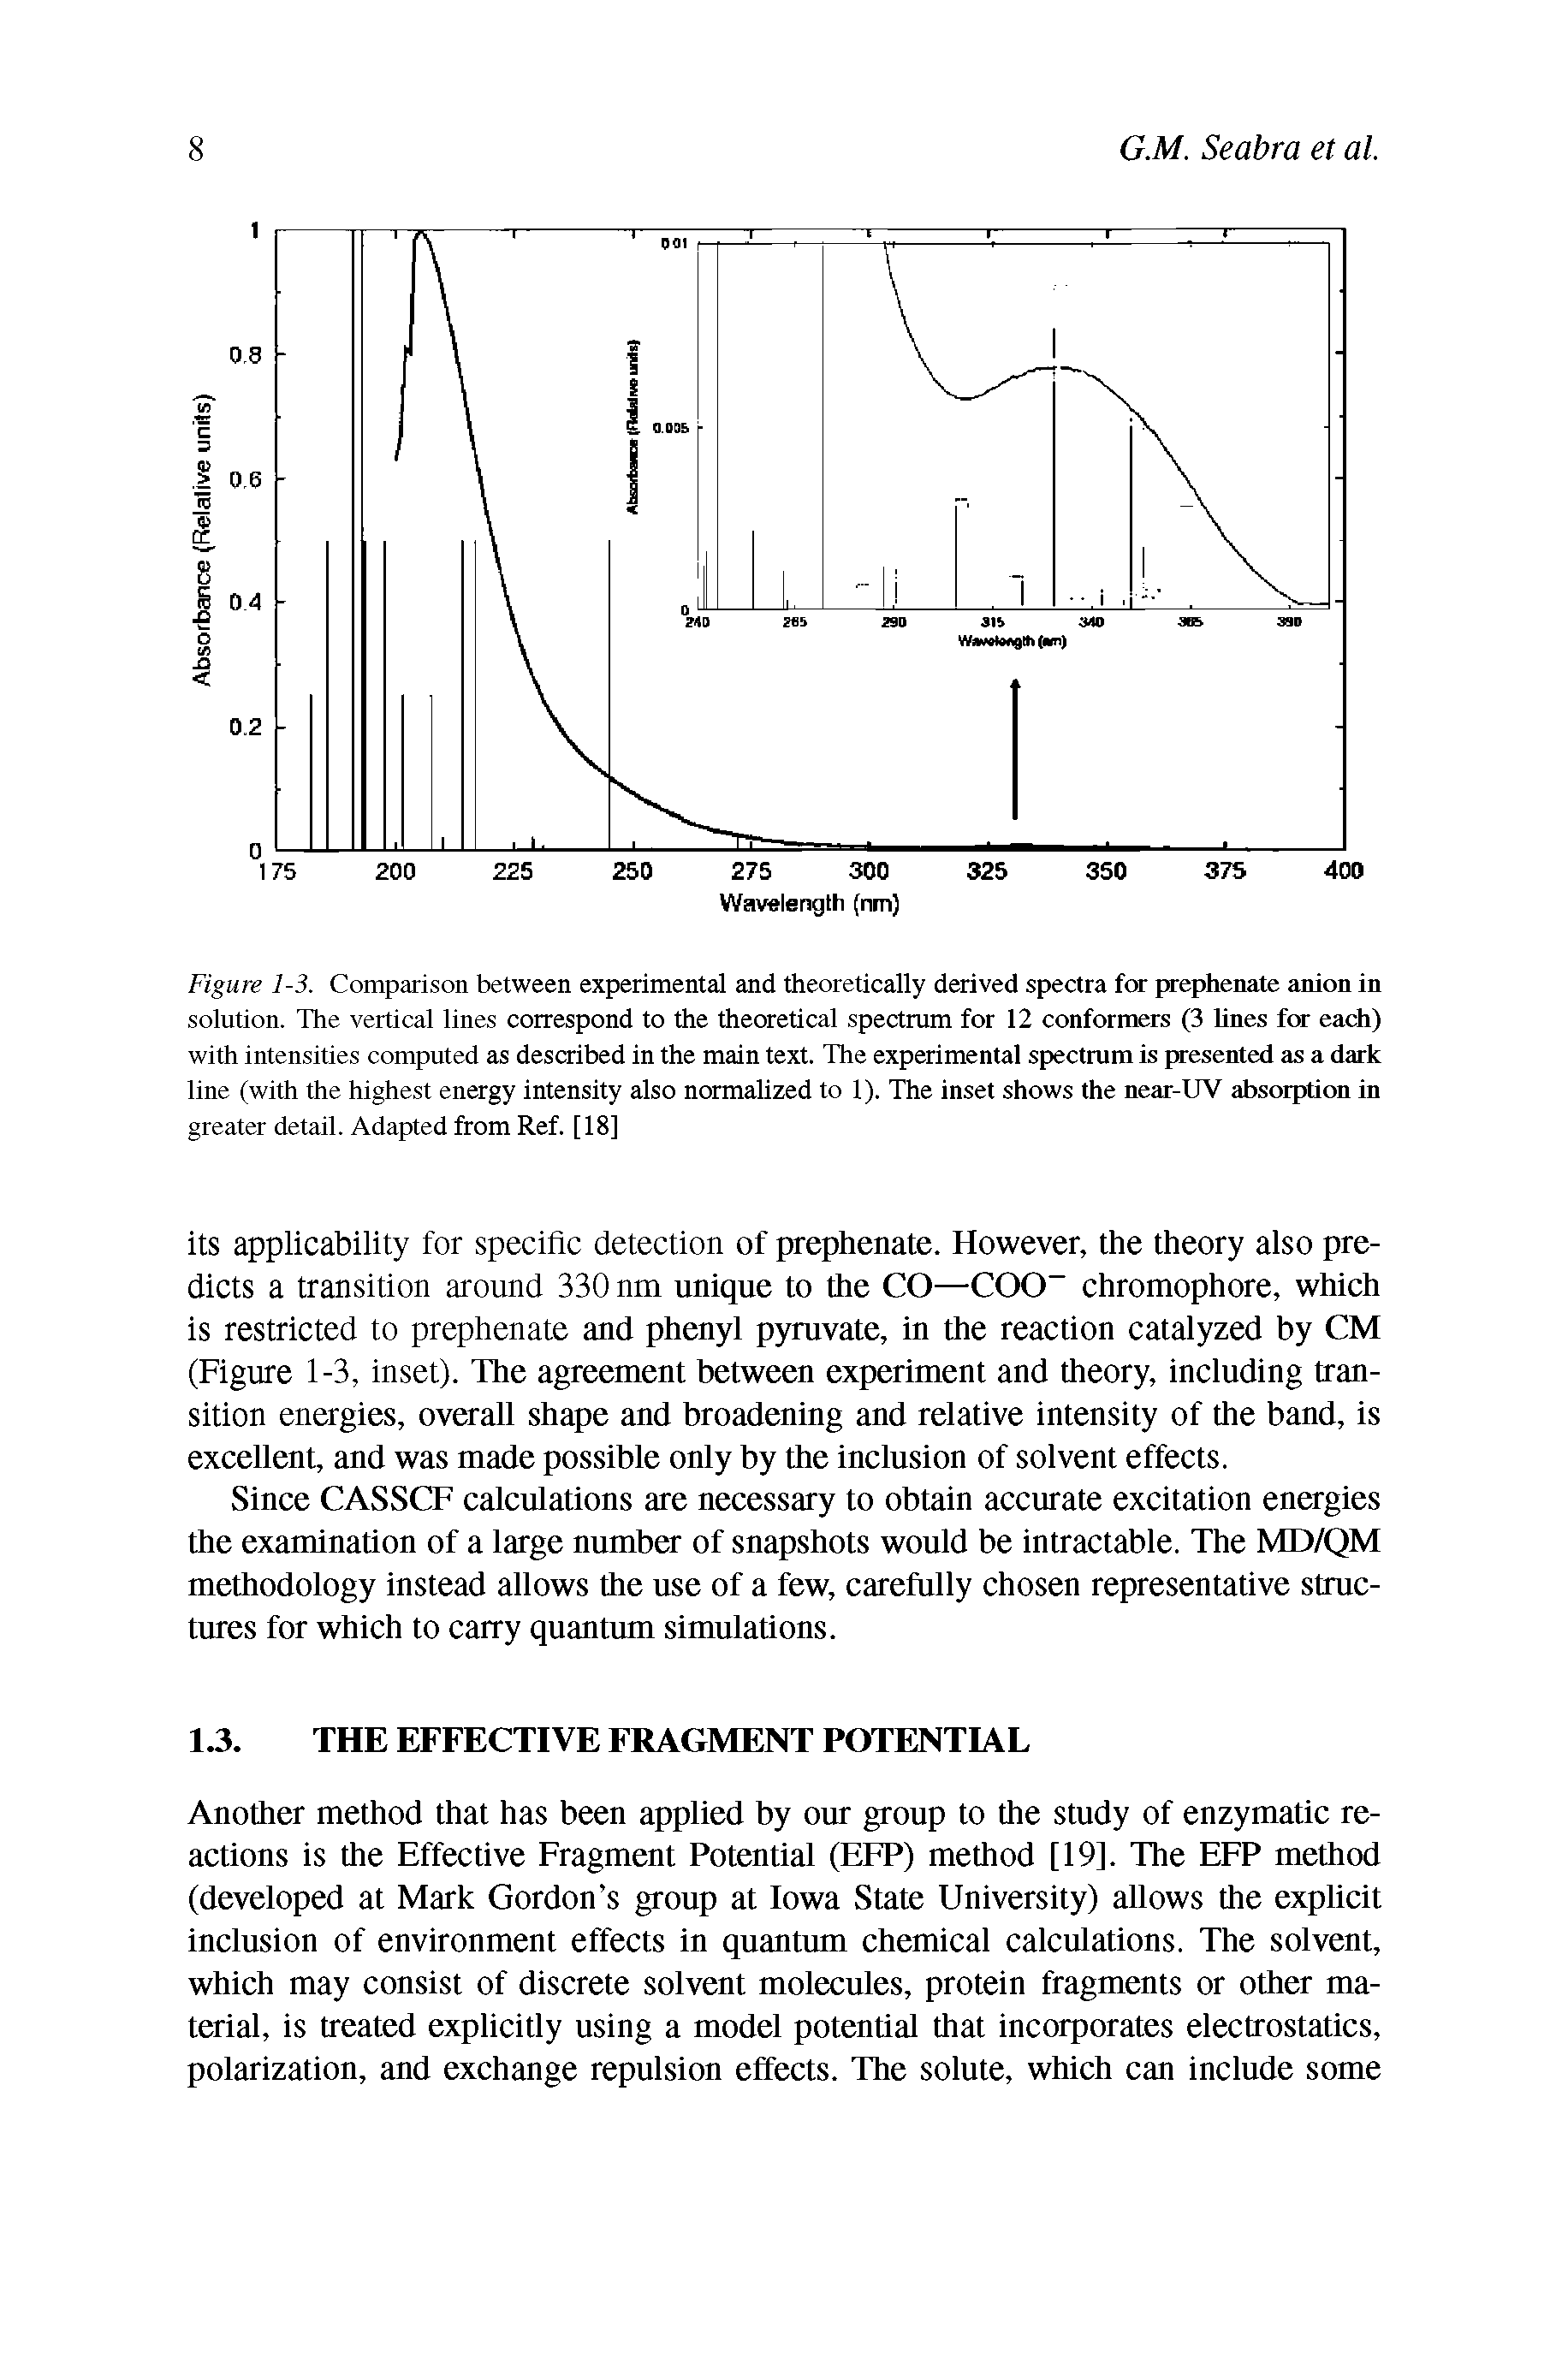 Figure 1-3. Comparison between experimental and theoretically derived spectra for prephenate anion in solution. The vertical lines correspond to the theoretical spectrum for 12 conformers (3 lines for each) with intensities computed as described in the main text. The experimental spectrum is presented as a dark line (with the highest energy intensity also normalized to 1). The inset shows the near-UV absorption in greater detail. Adapted from Ref. [18]...